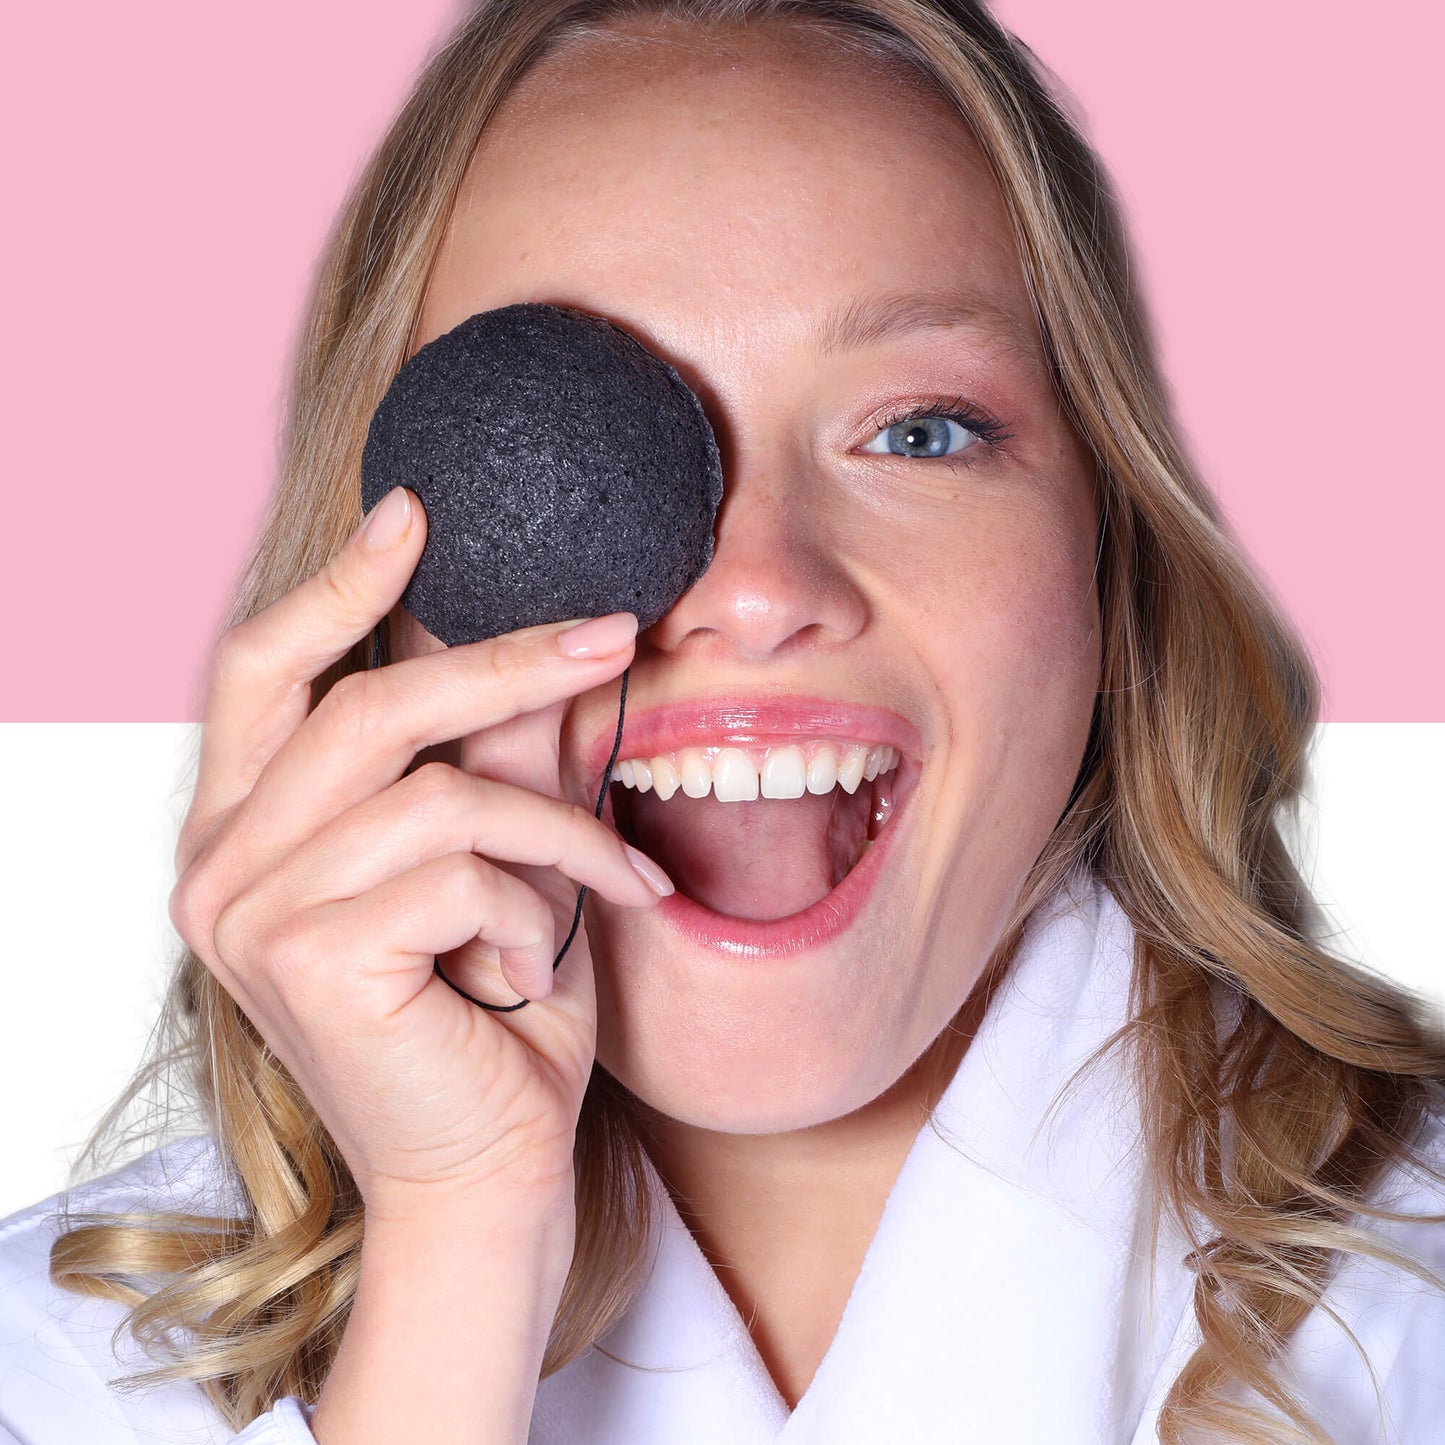 Afterspa Charcoal Konjac Sponge _ Cleansing By Detoxifying The Skin. 